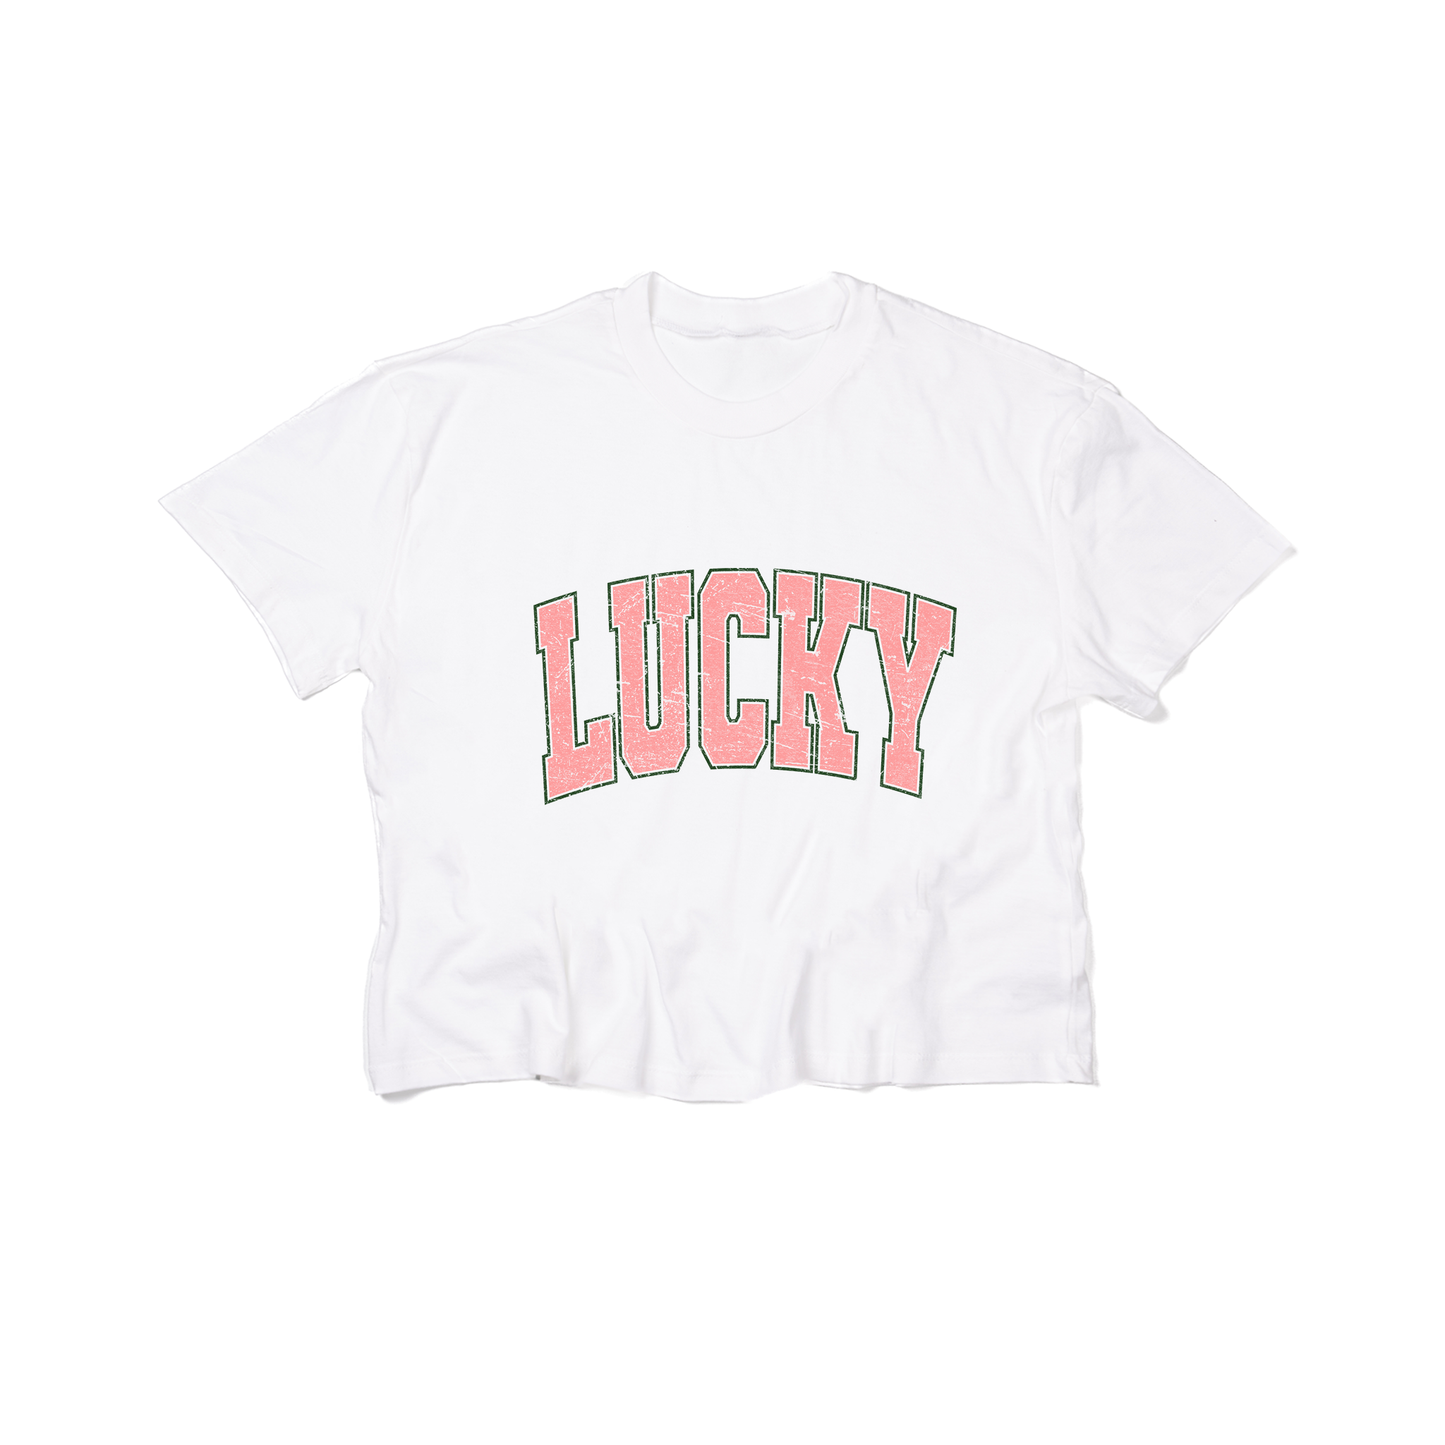 LUCKY (Varsity, Pink) - Cropped Tee (White)